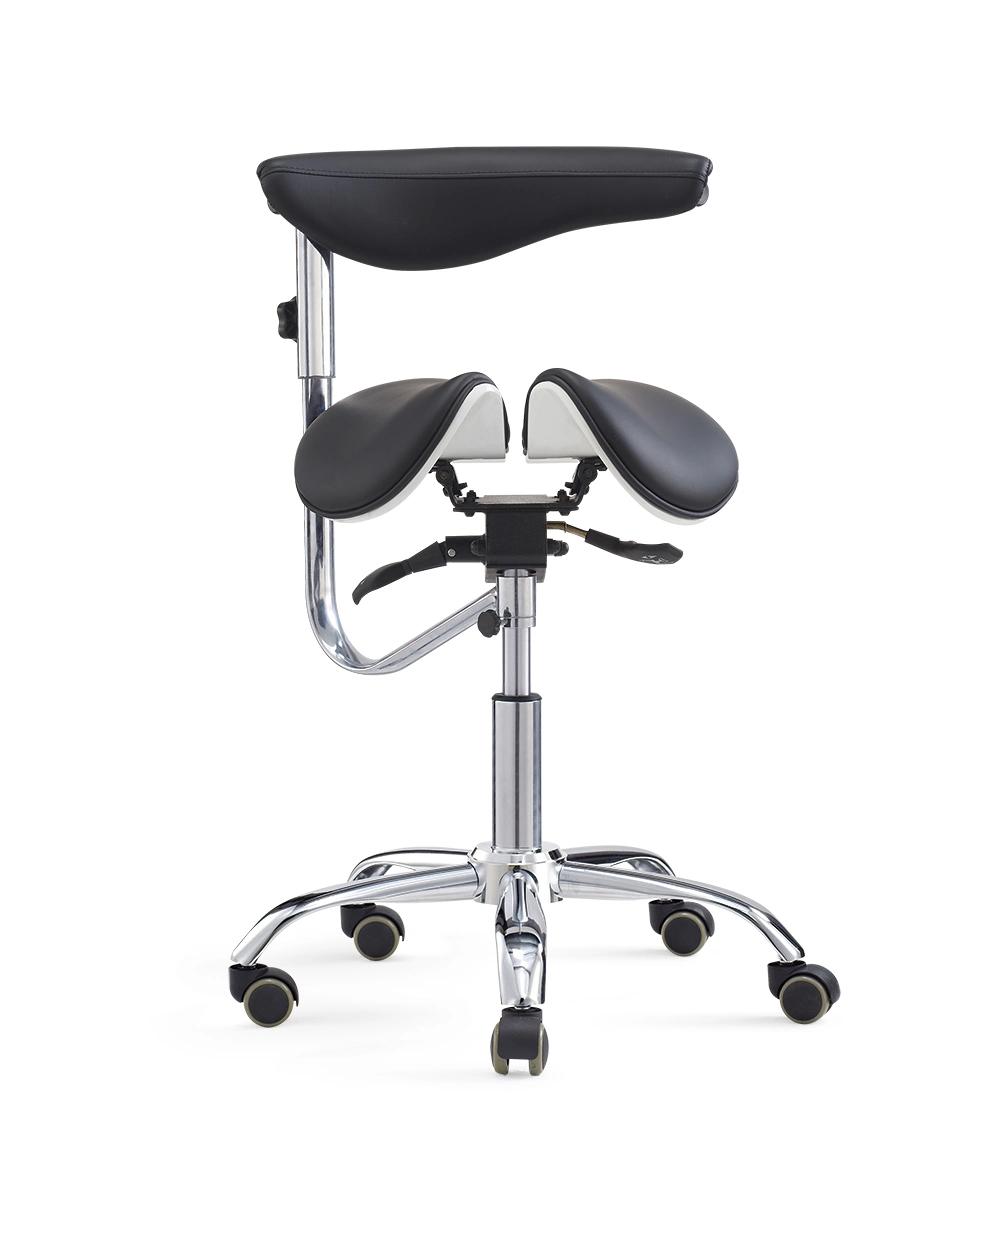 PU Leather Medical Dentist Saddle Chair Foot Controlled Mobile Doctors′ Stool